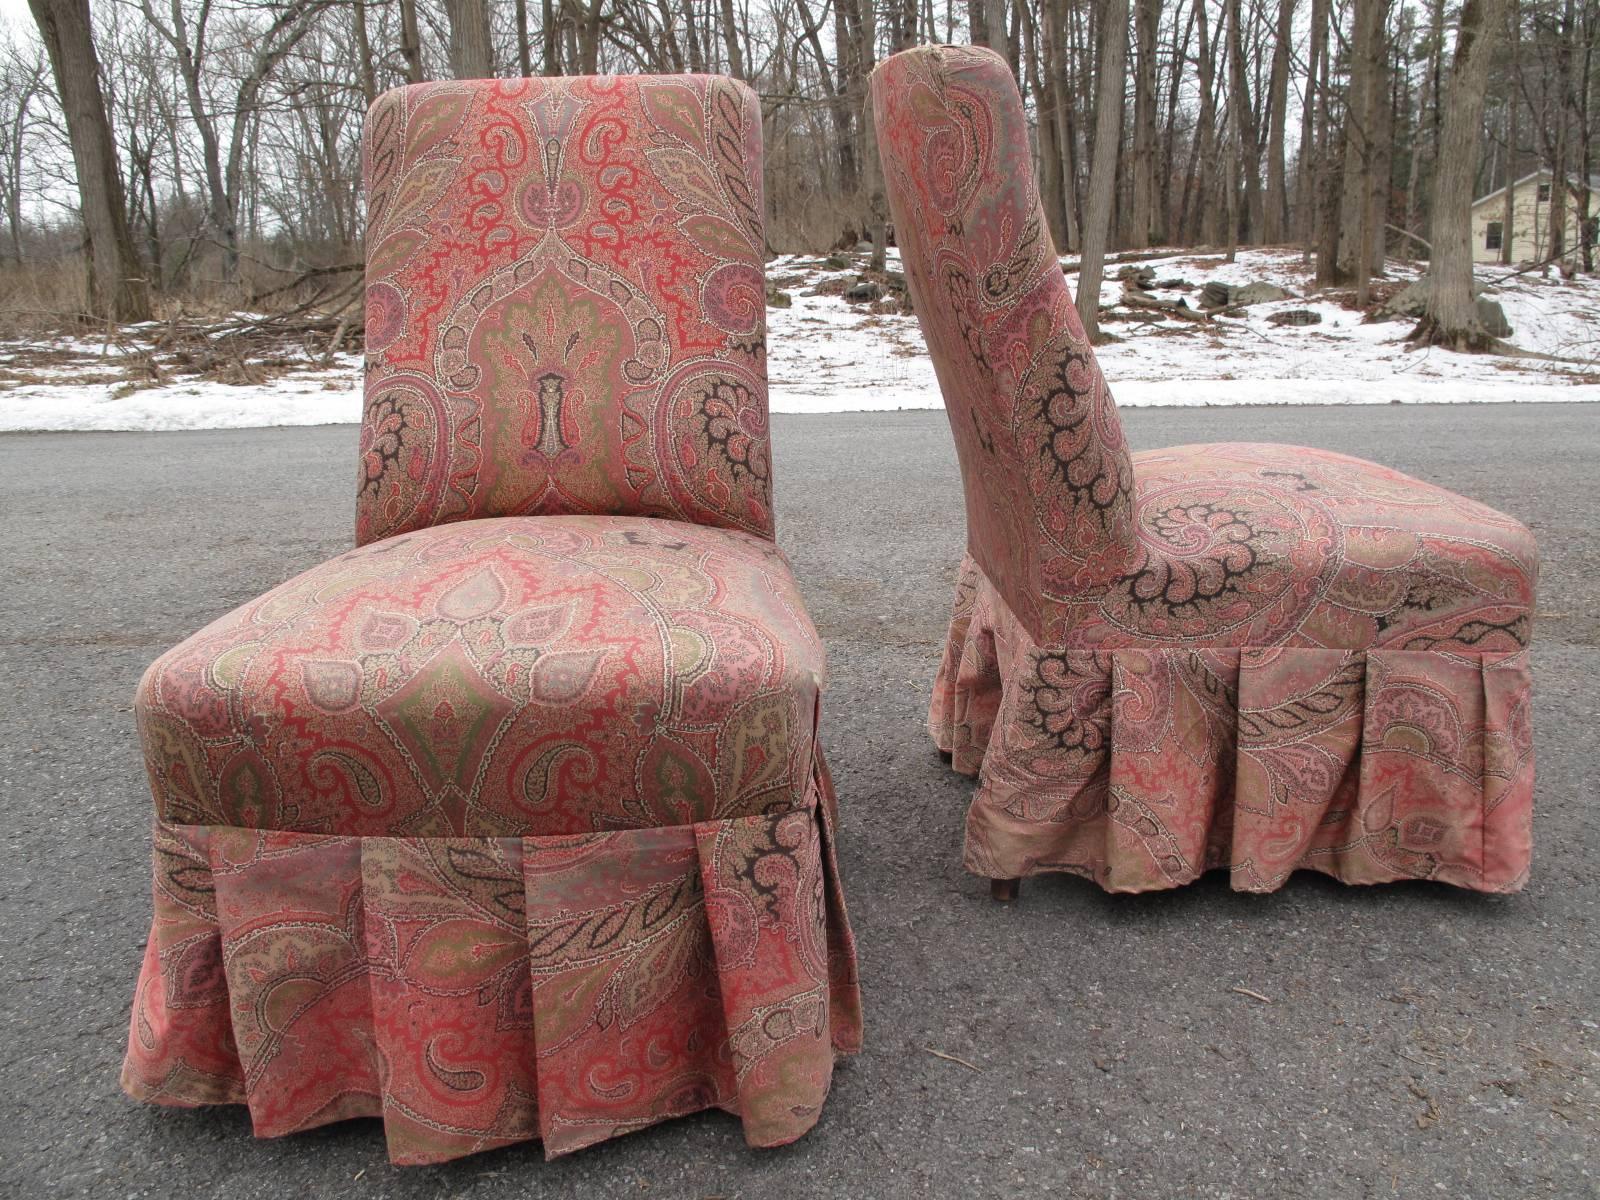 1890s armless high back chairs from France. Upholstered in delicate paisley from Boussac Saint Freres. chairs pre-date the upholstery fabric. Delicate turned legs on brass casters.